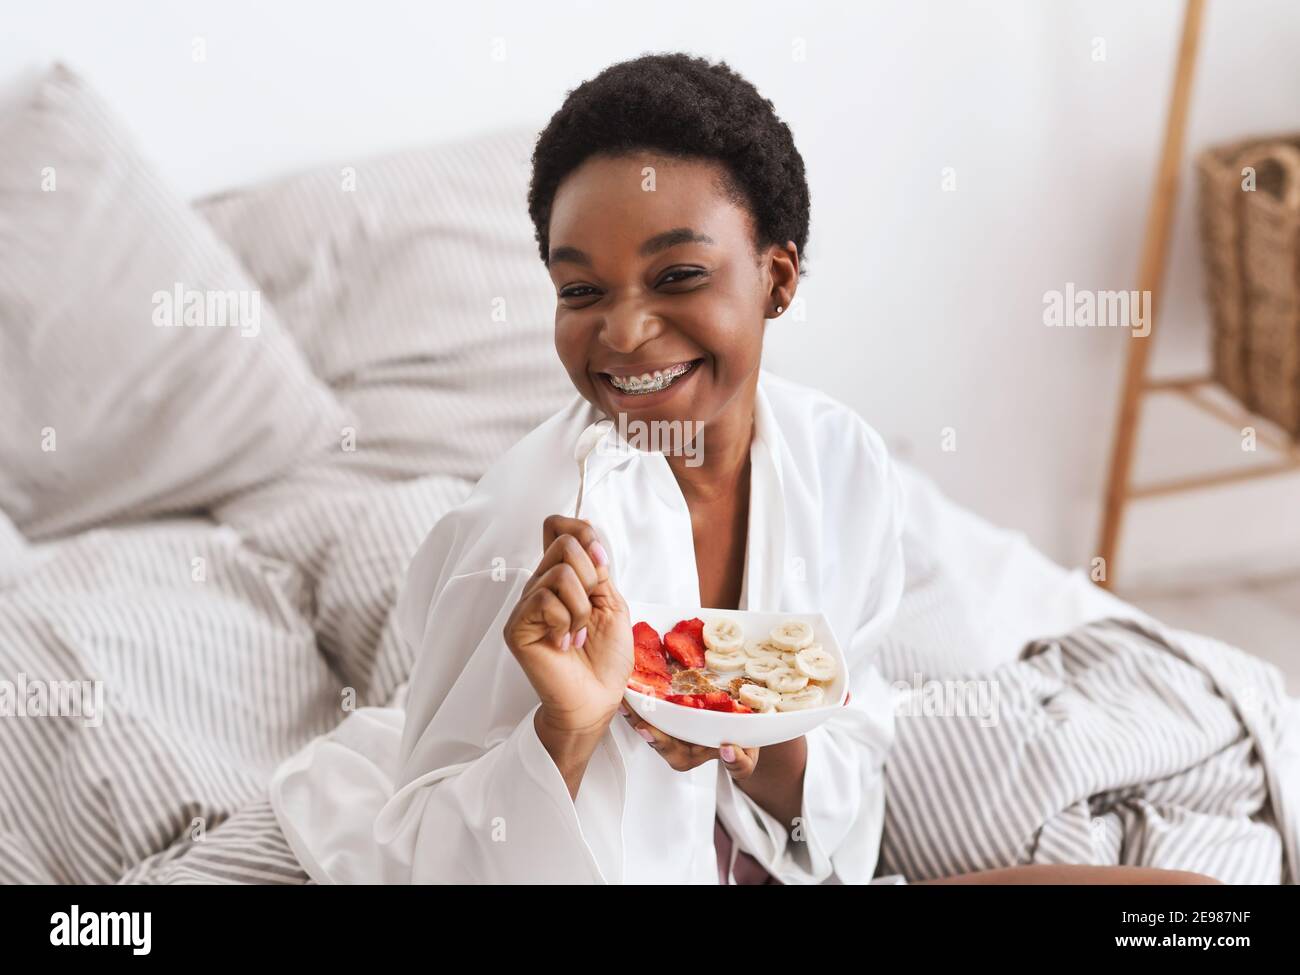 Healthy lifestyle, beauty care, proper nutrition and good morning Stock Photo